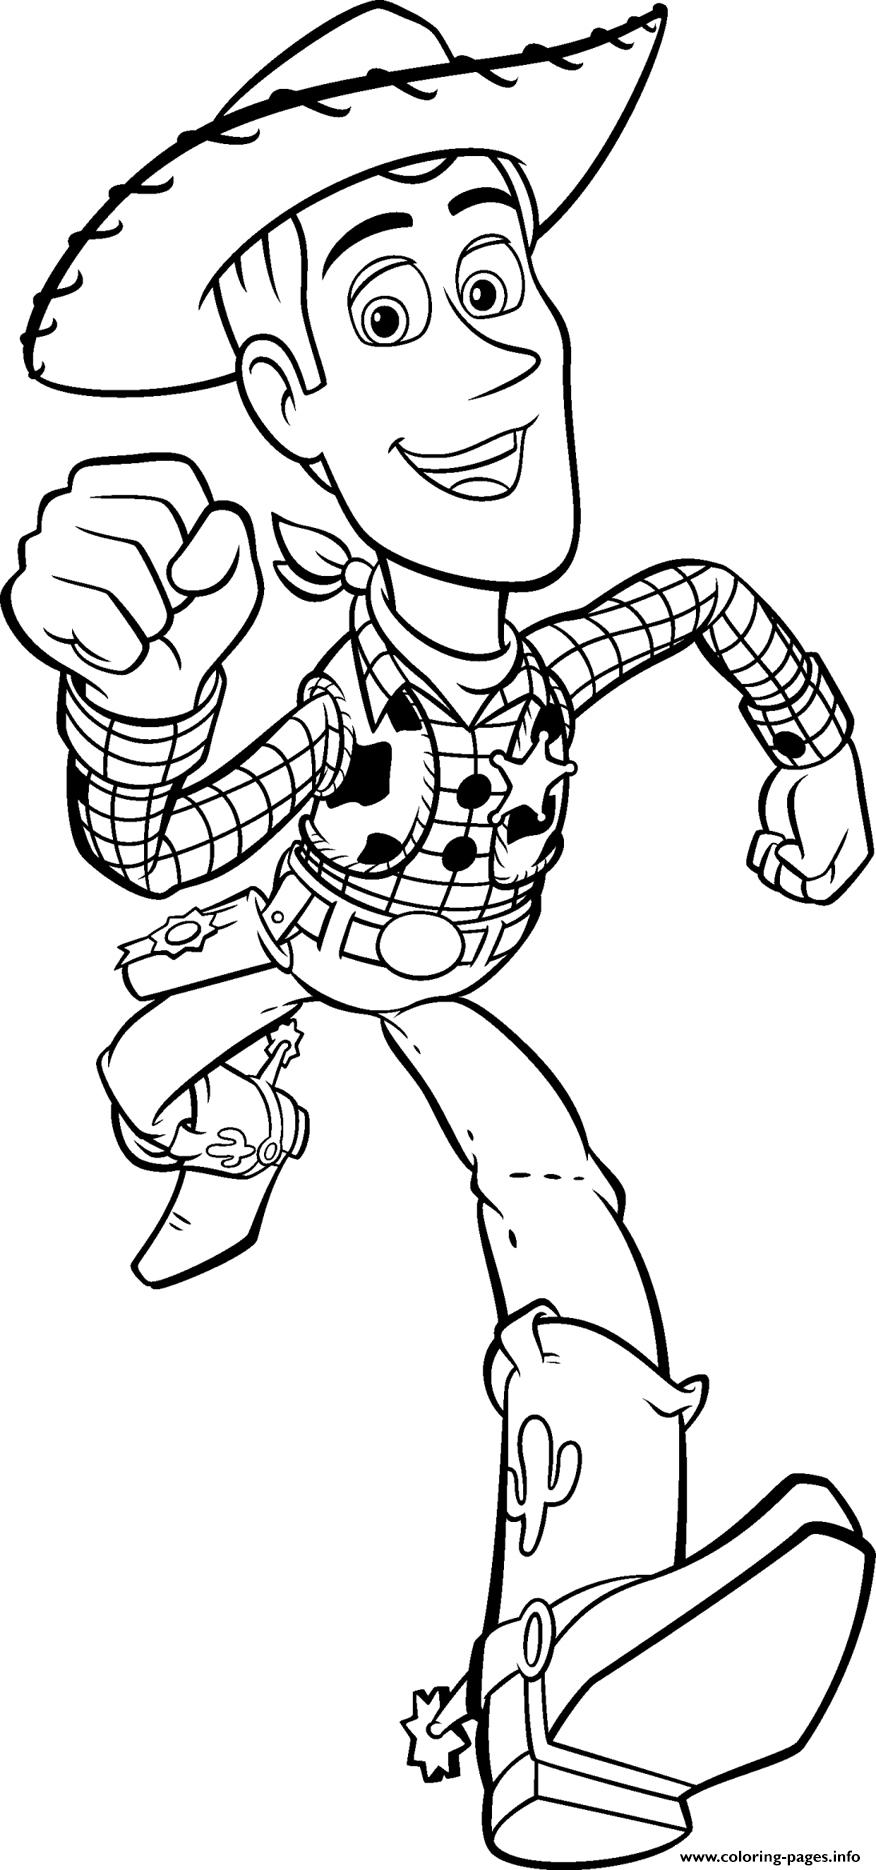 Woody S Printable Toy Story0182 coloring